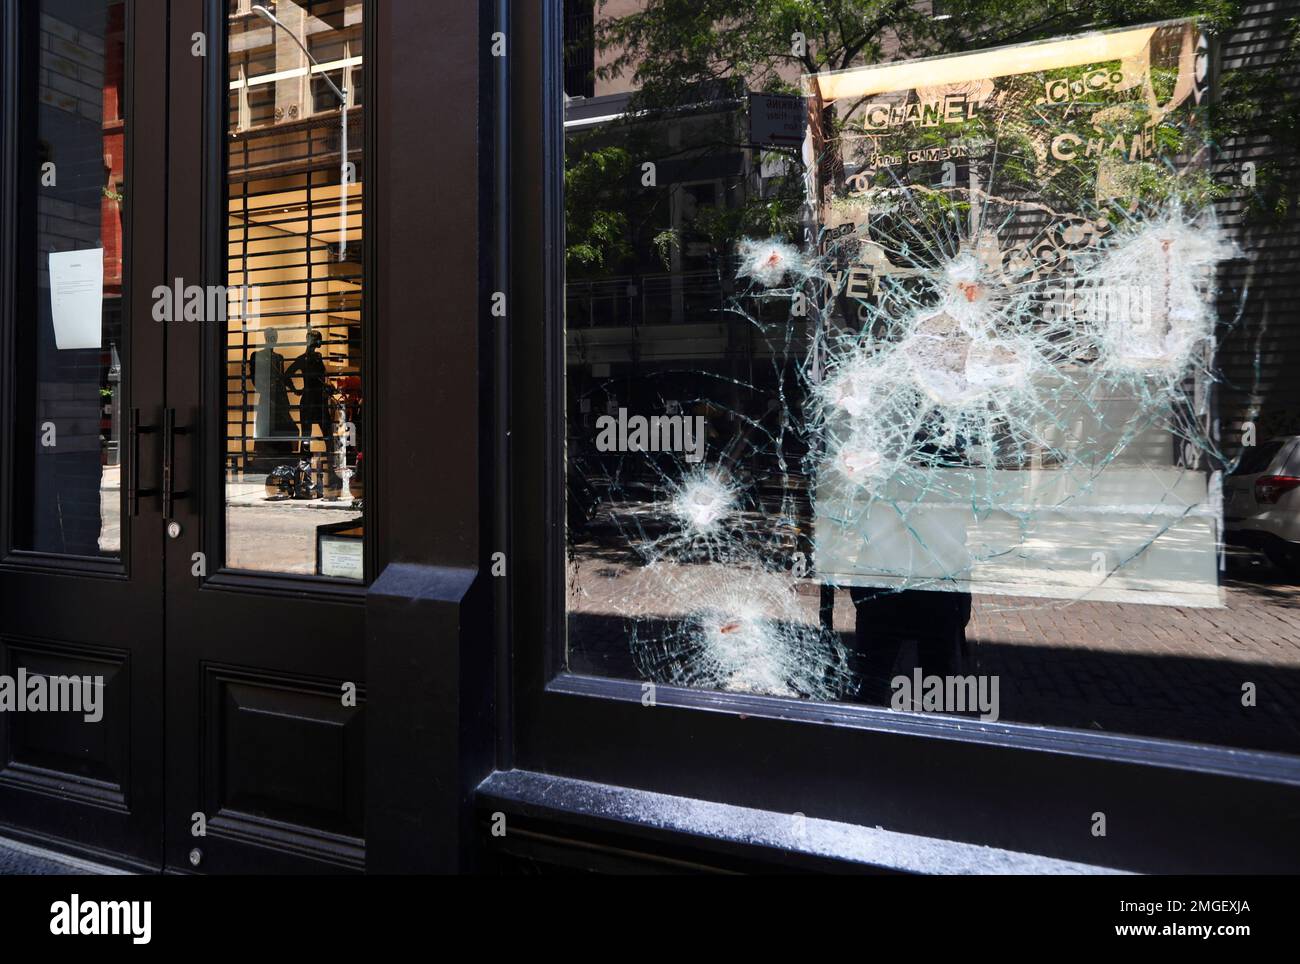 Damaged windows of a Chanel store are shown, Sunday, May 31, 2020